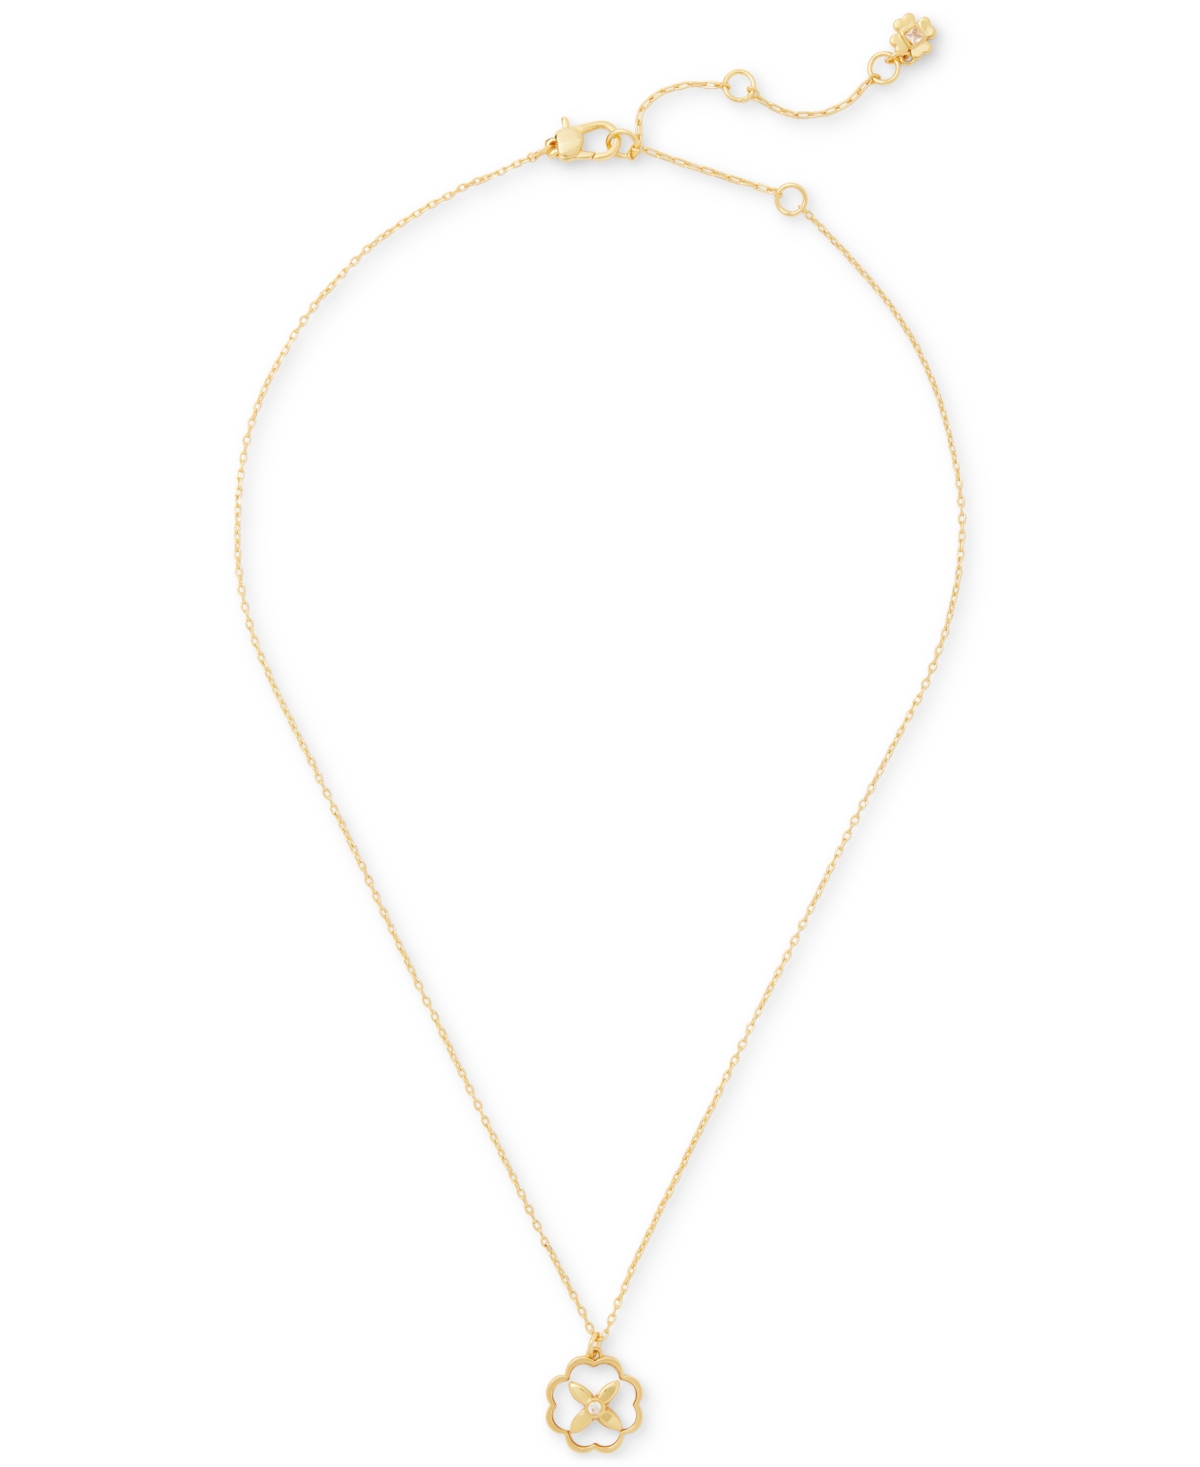 KATE SPADE GOLD-TONE HERITAGE BLOOM MOTHER-OF-PEARL PENDANT NECKLACE, 16" + 3" EXTENDER